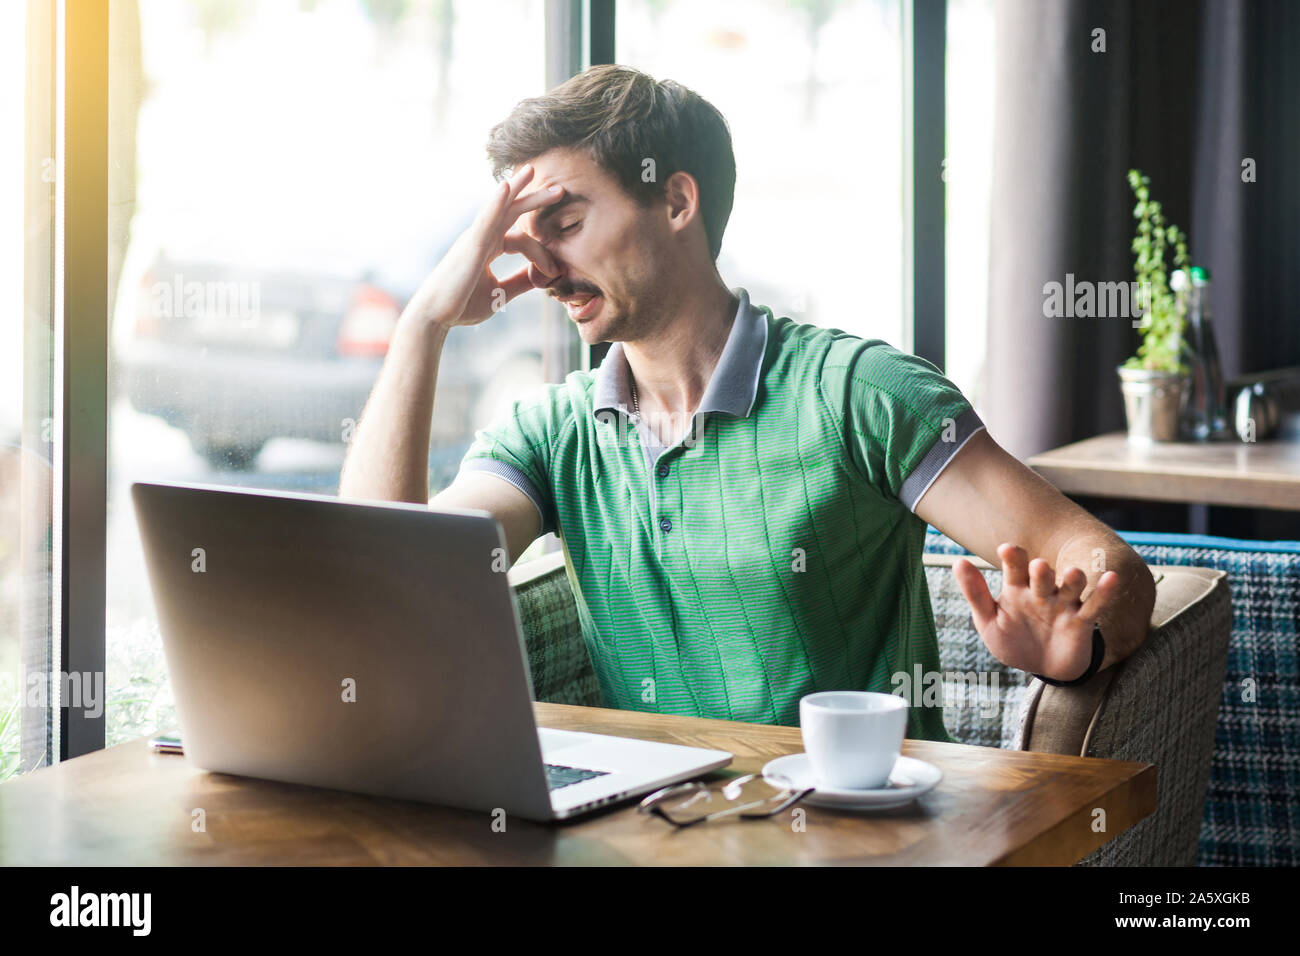 Bad smell. Young dissatisfied businessman in green t-shirt sitting and working on laptop, pinching his nose with negative emotion. business and freela Stock Photo